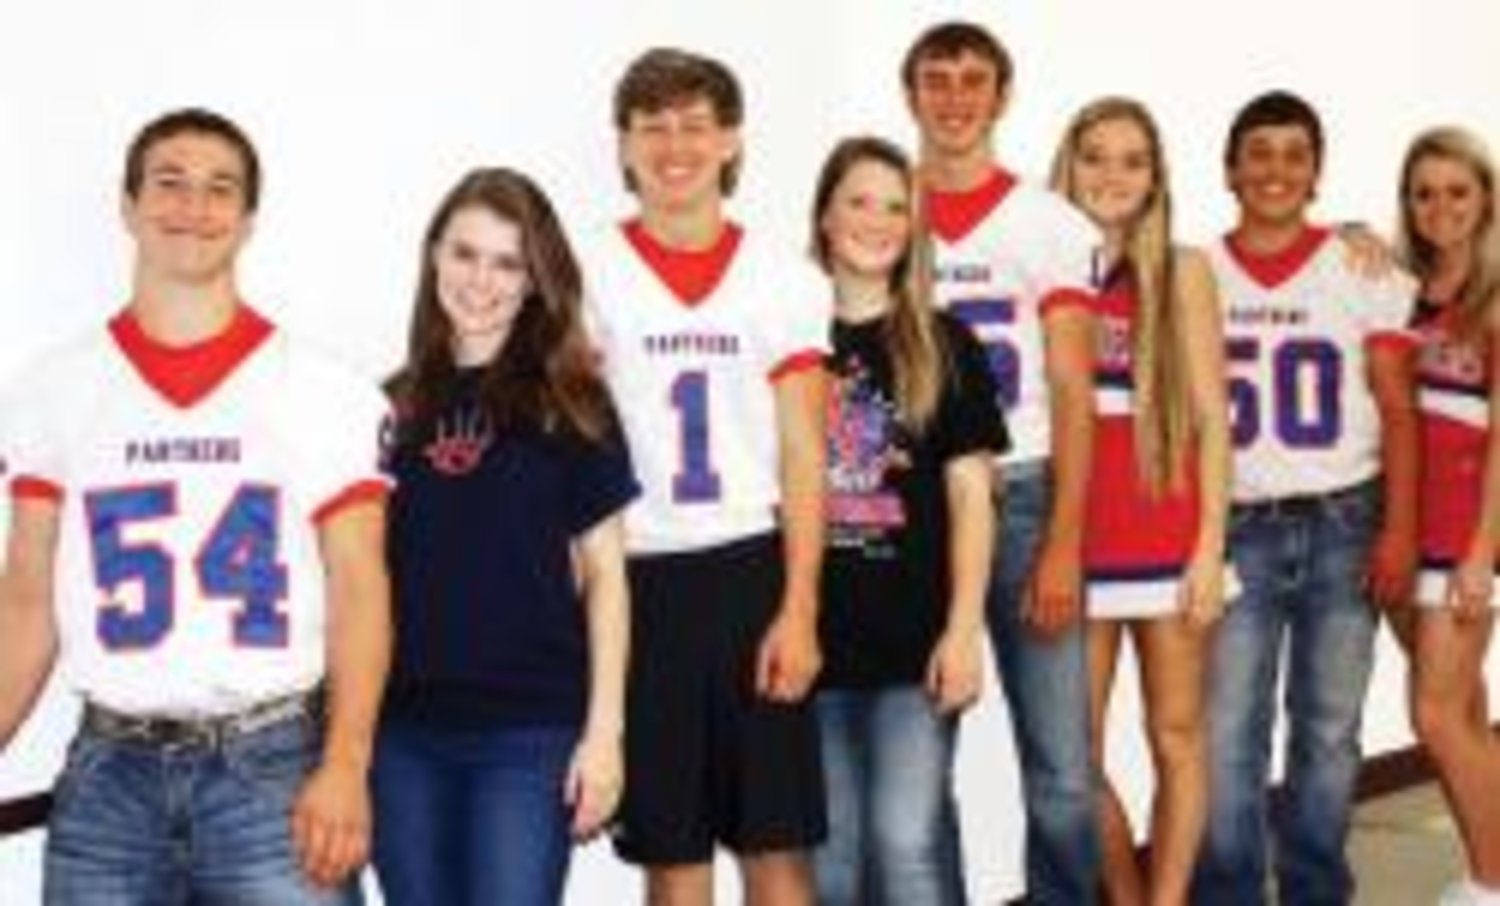 The Alba-Golden homecoming king and queen will be chosen from this group of seniors. They are (left to right) David Wilson, Claire Glidewell, Dylan Harle, Jocelyn Hockett, Logan Culp, Caitlin Lennon, Carter Lennon, and Erin Roberts.